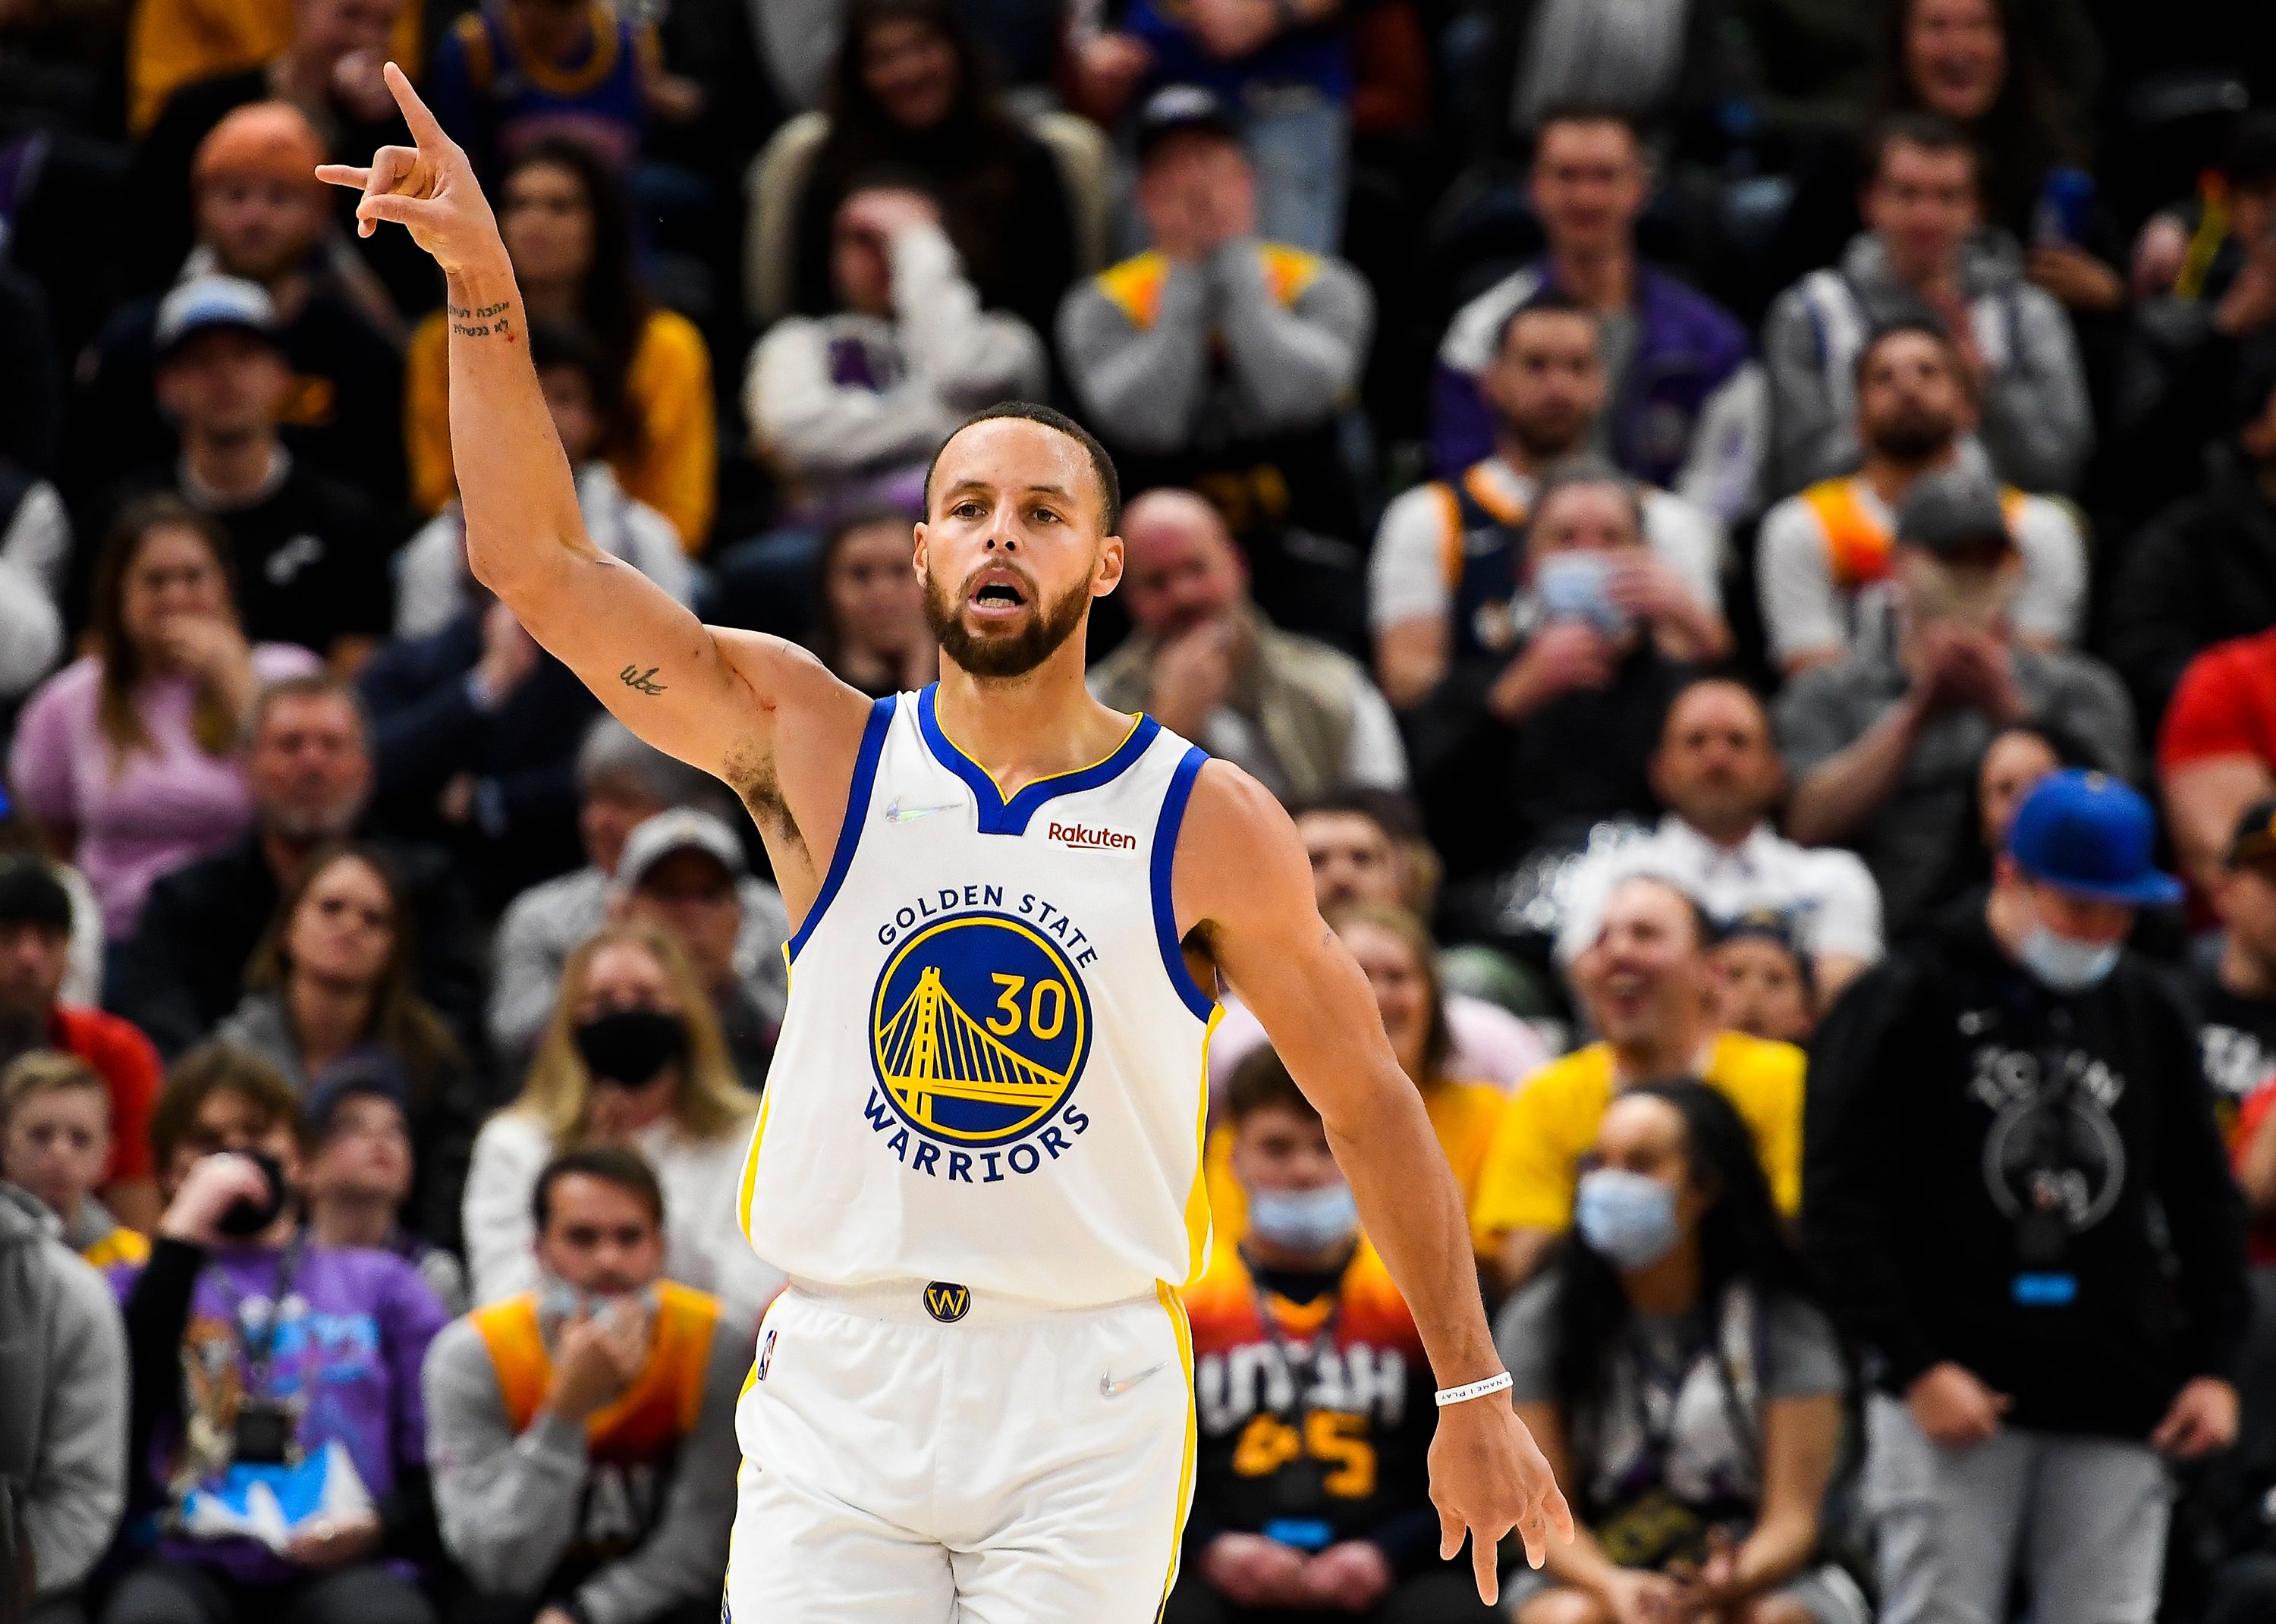 Golden State Warriors' Stephen Curry shatters the career three-point shot  record